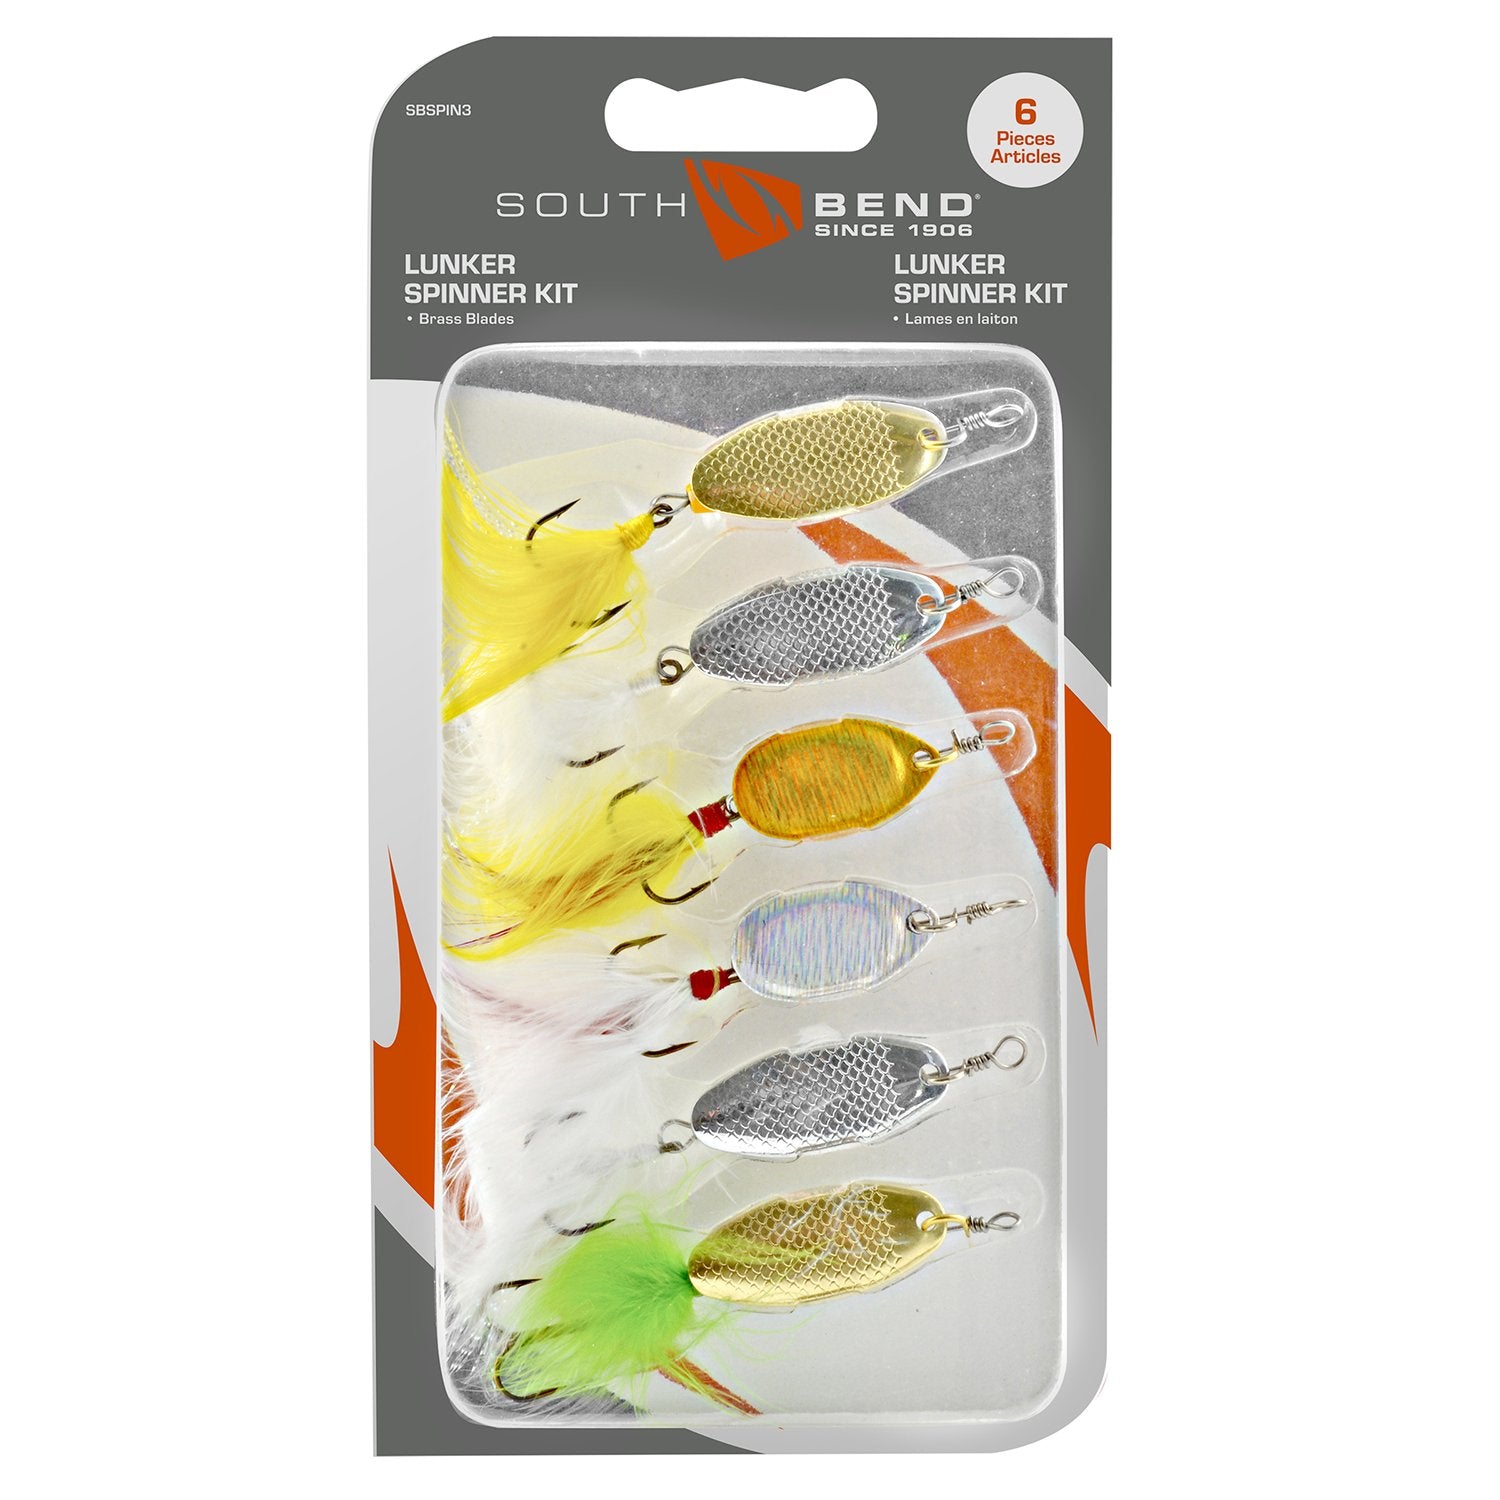 Crappie Spinner Kit - 6 Pack